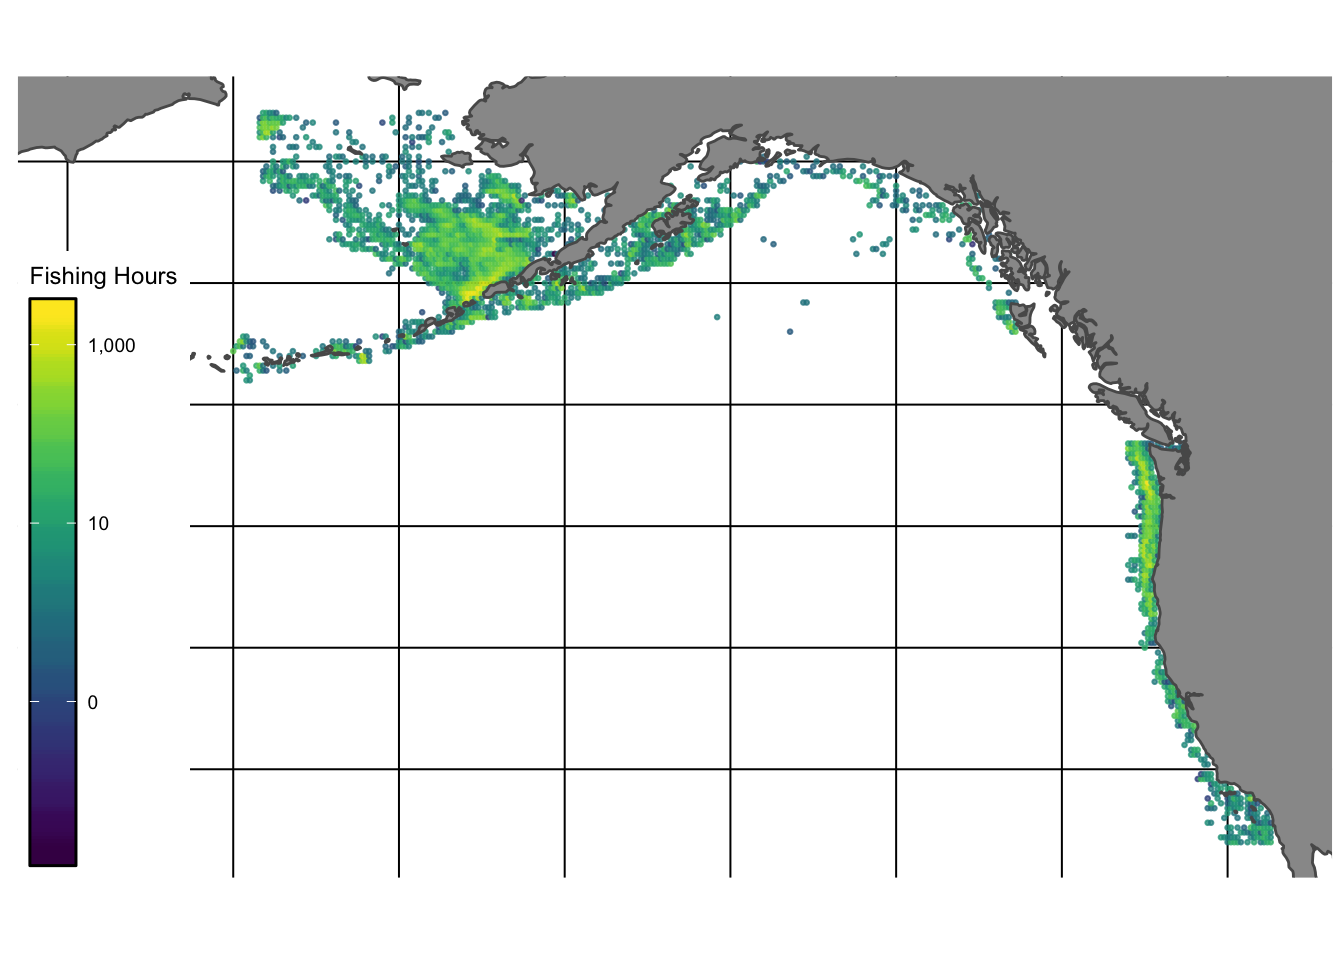 Total hours of fishing activity reported by Global Fishing Watch in the Eastern Bering Sea, Aluetian Islands, Gulf of Alaska, and US West Coast regions